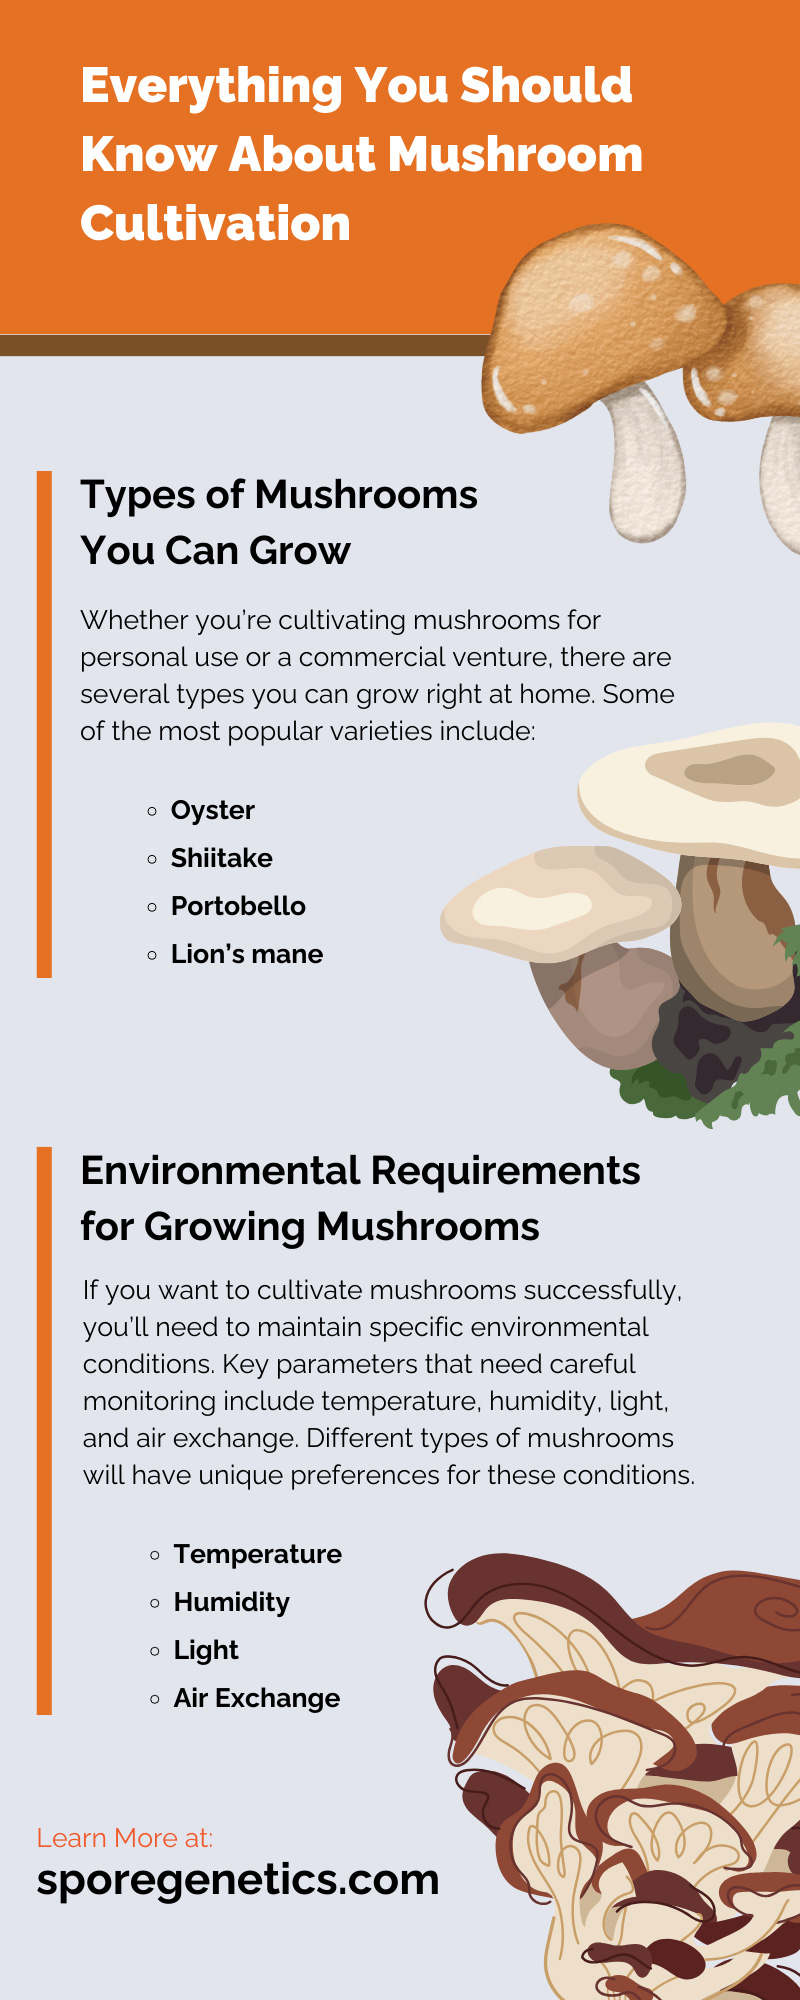 Everything You Should Know About Mushroom Cultivation